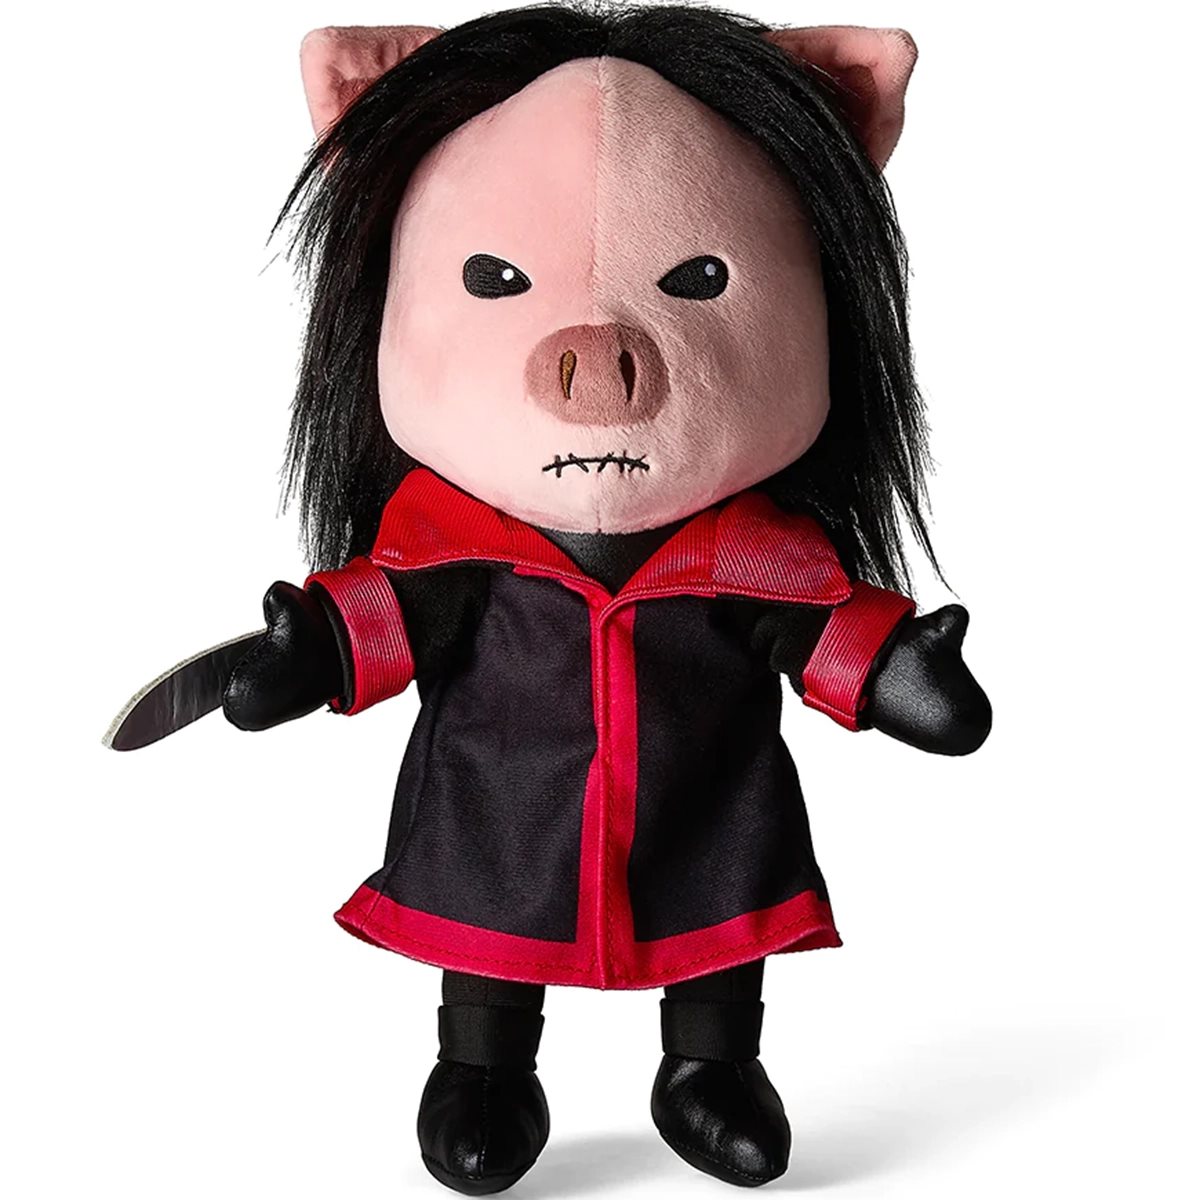 Horror Survival Game 'PIGGY' Getting Halloween Costumes from